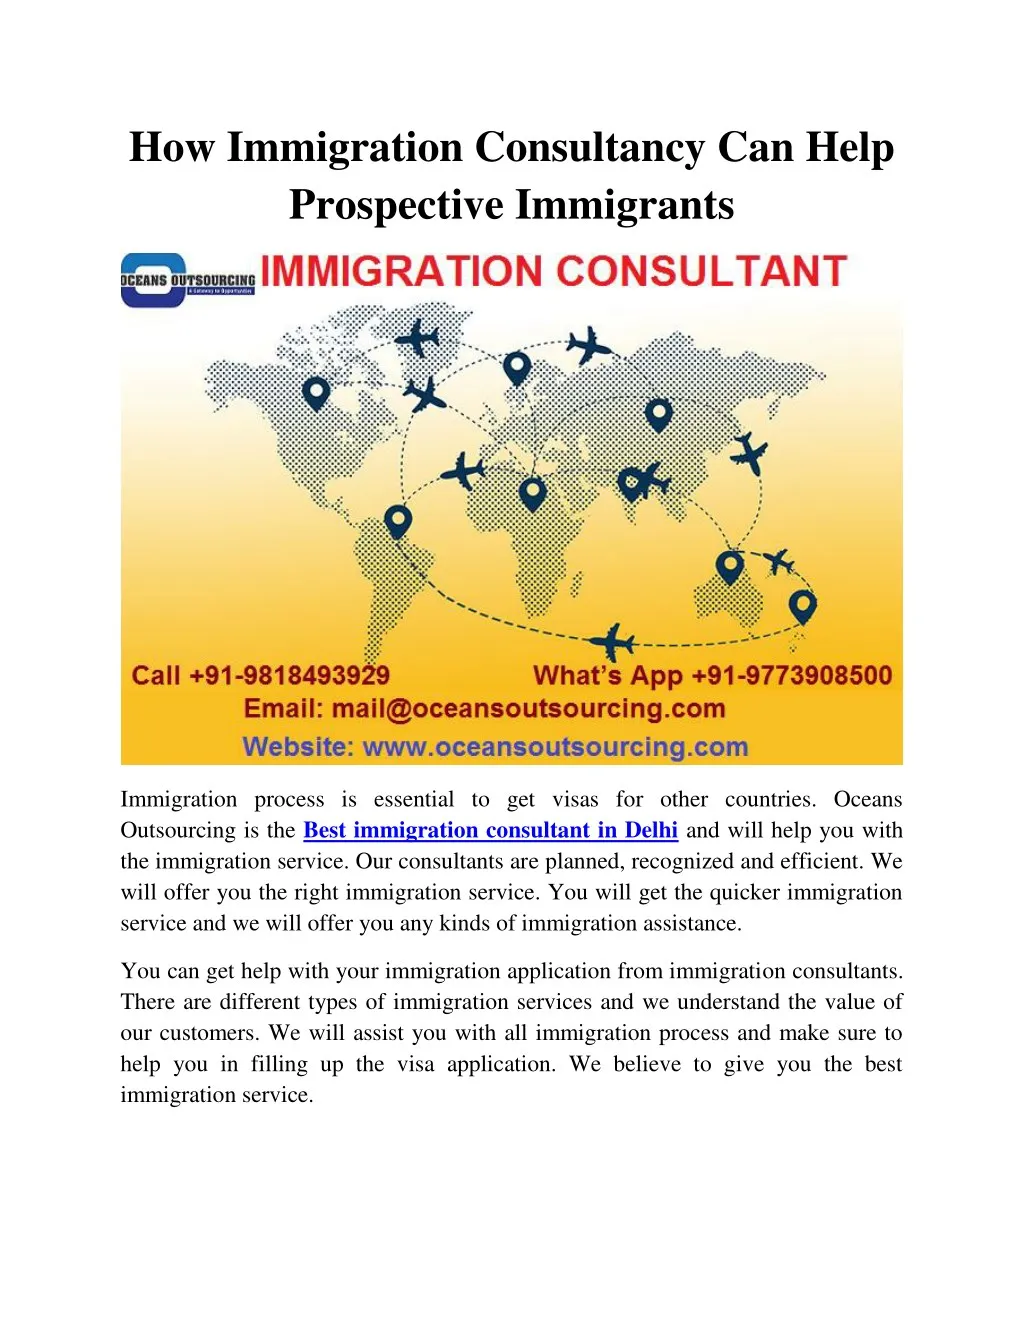 how immigration consultancy can help prospective